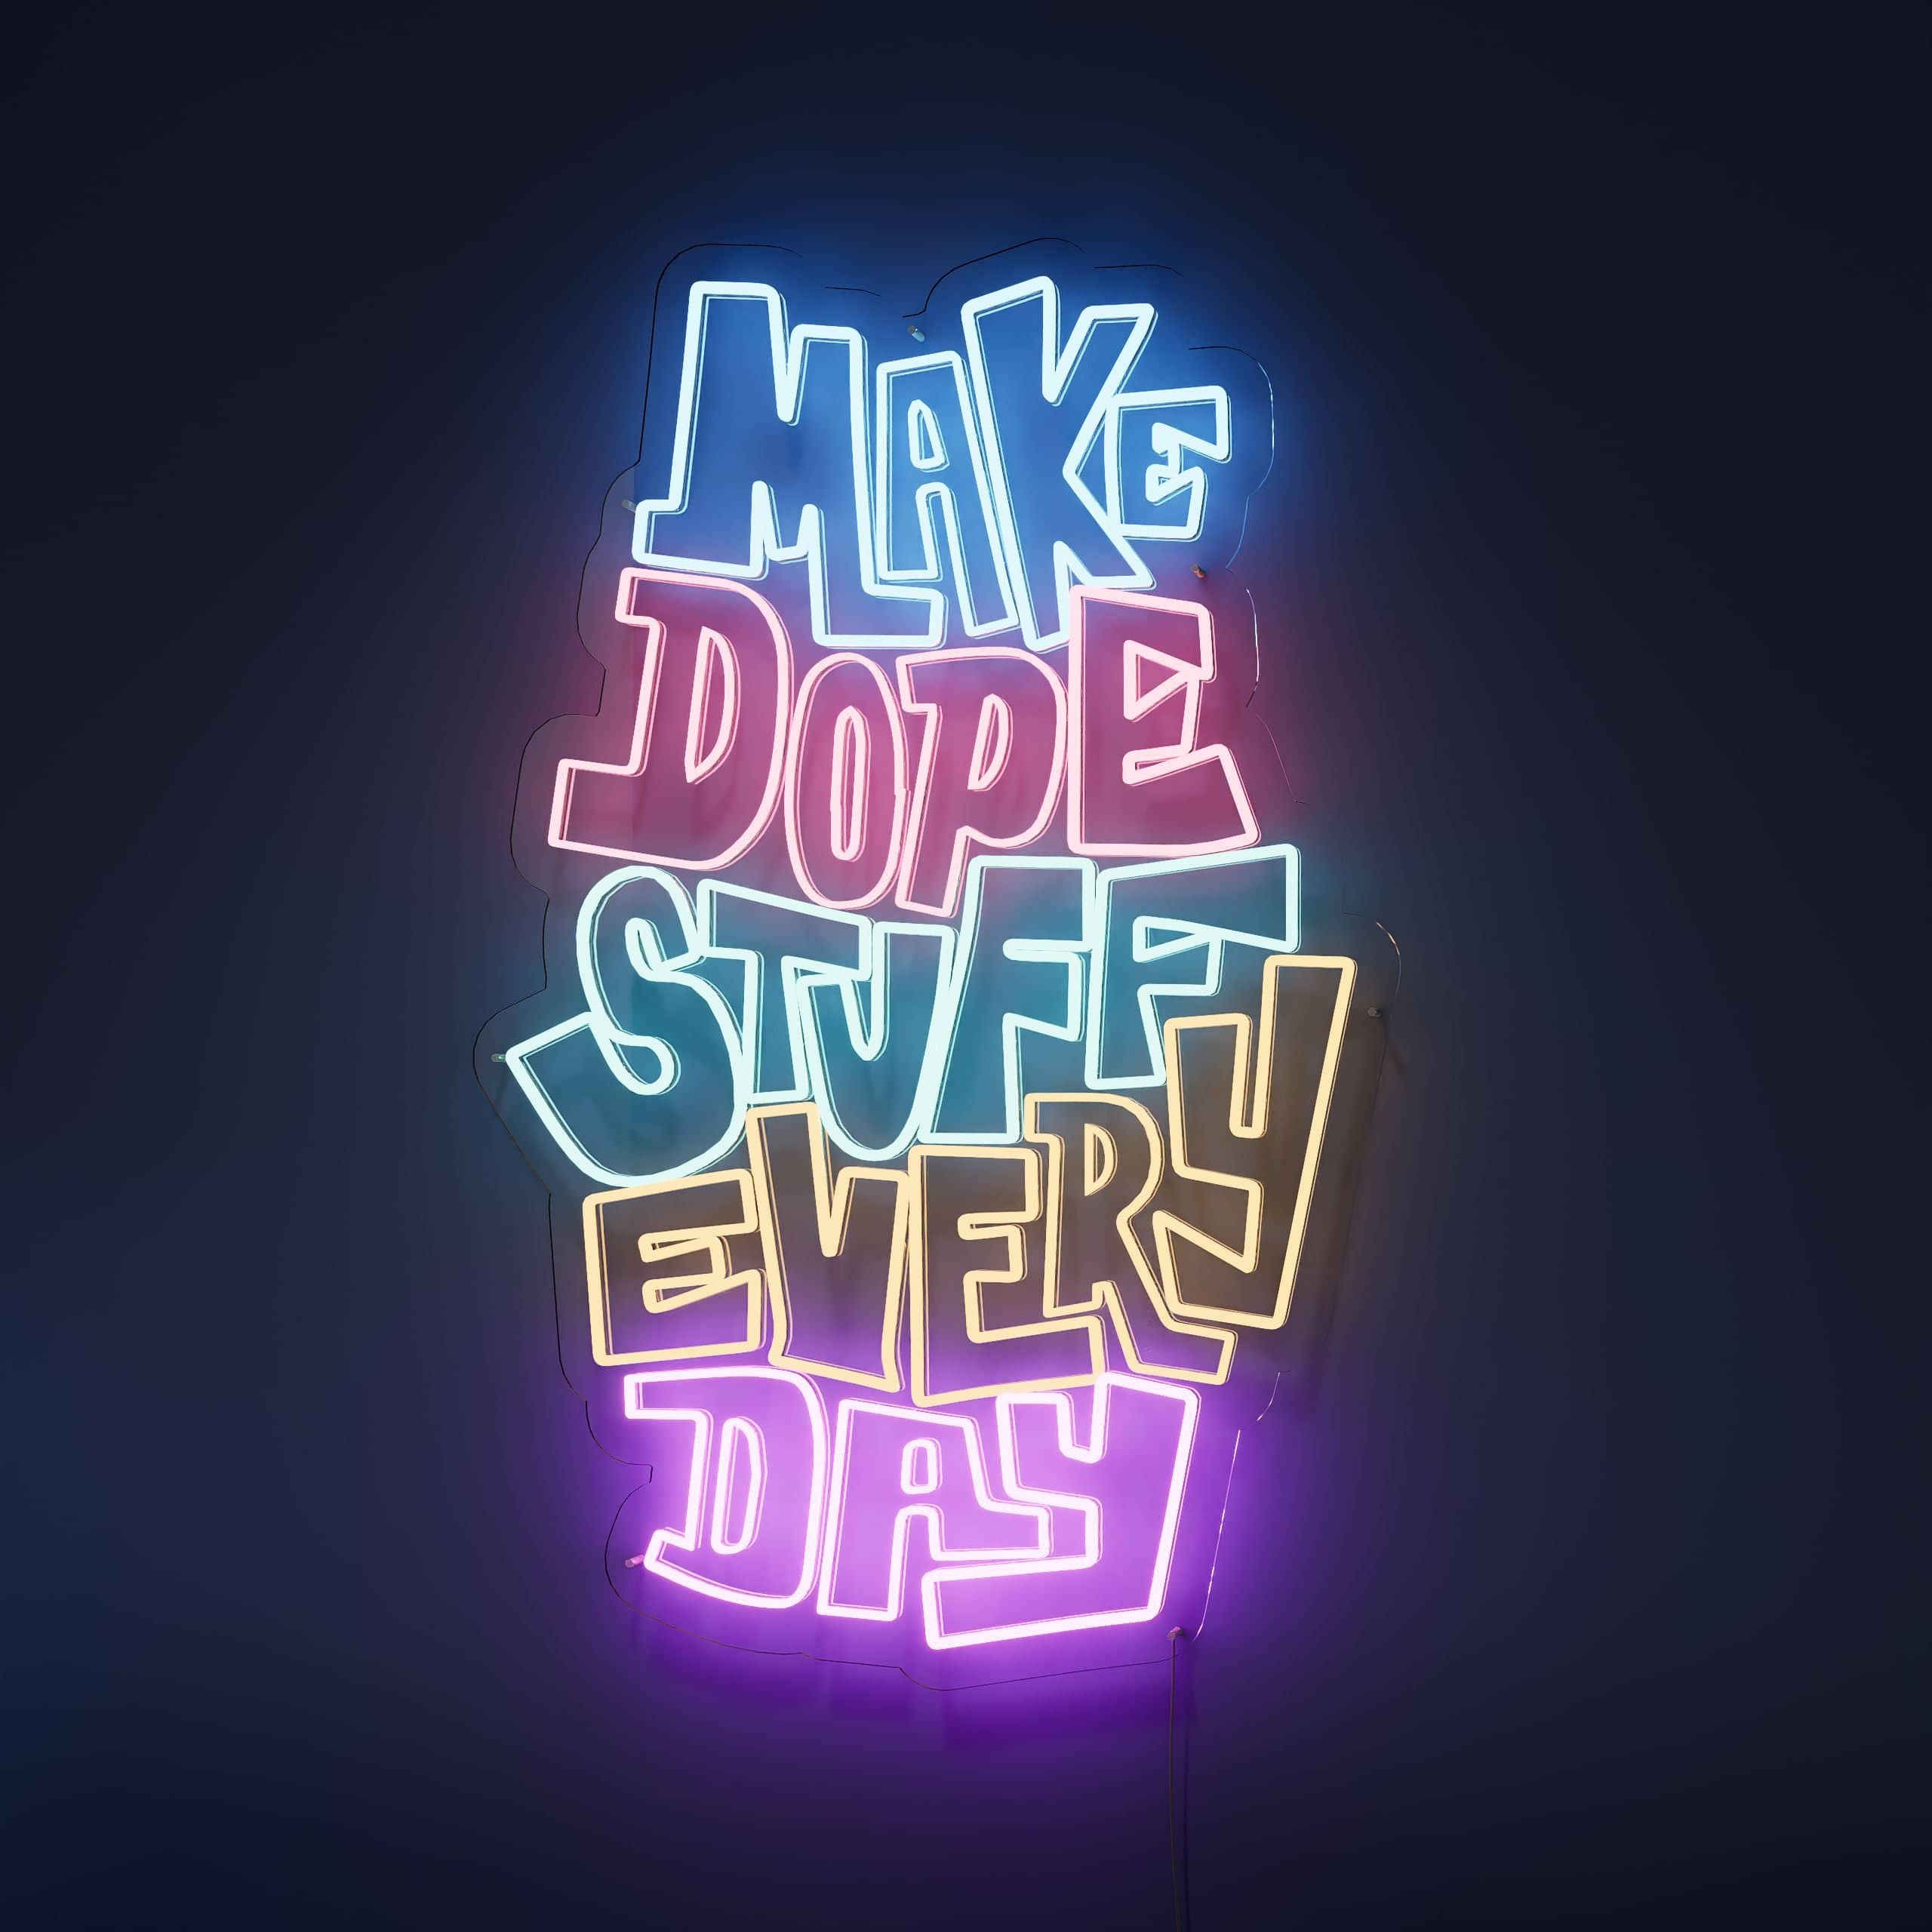 create-cool-things-daily-neon-sign-lite